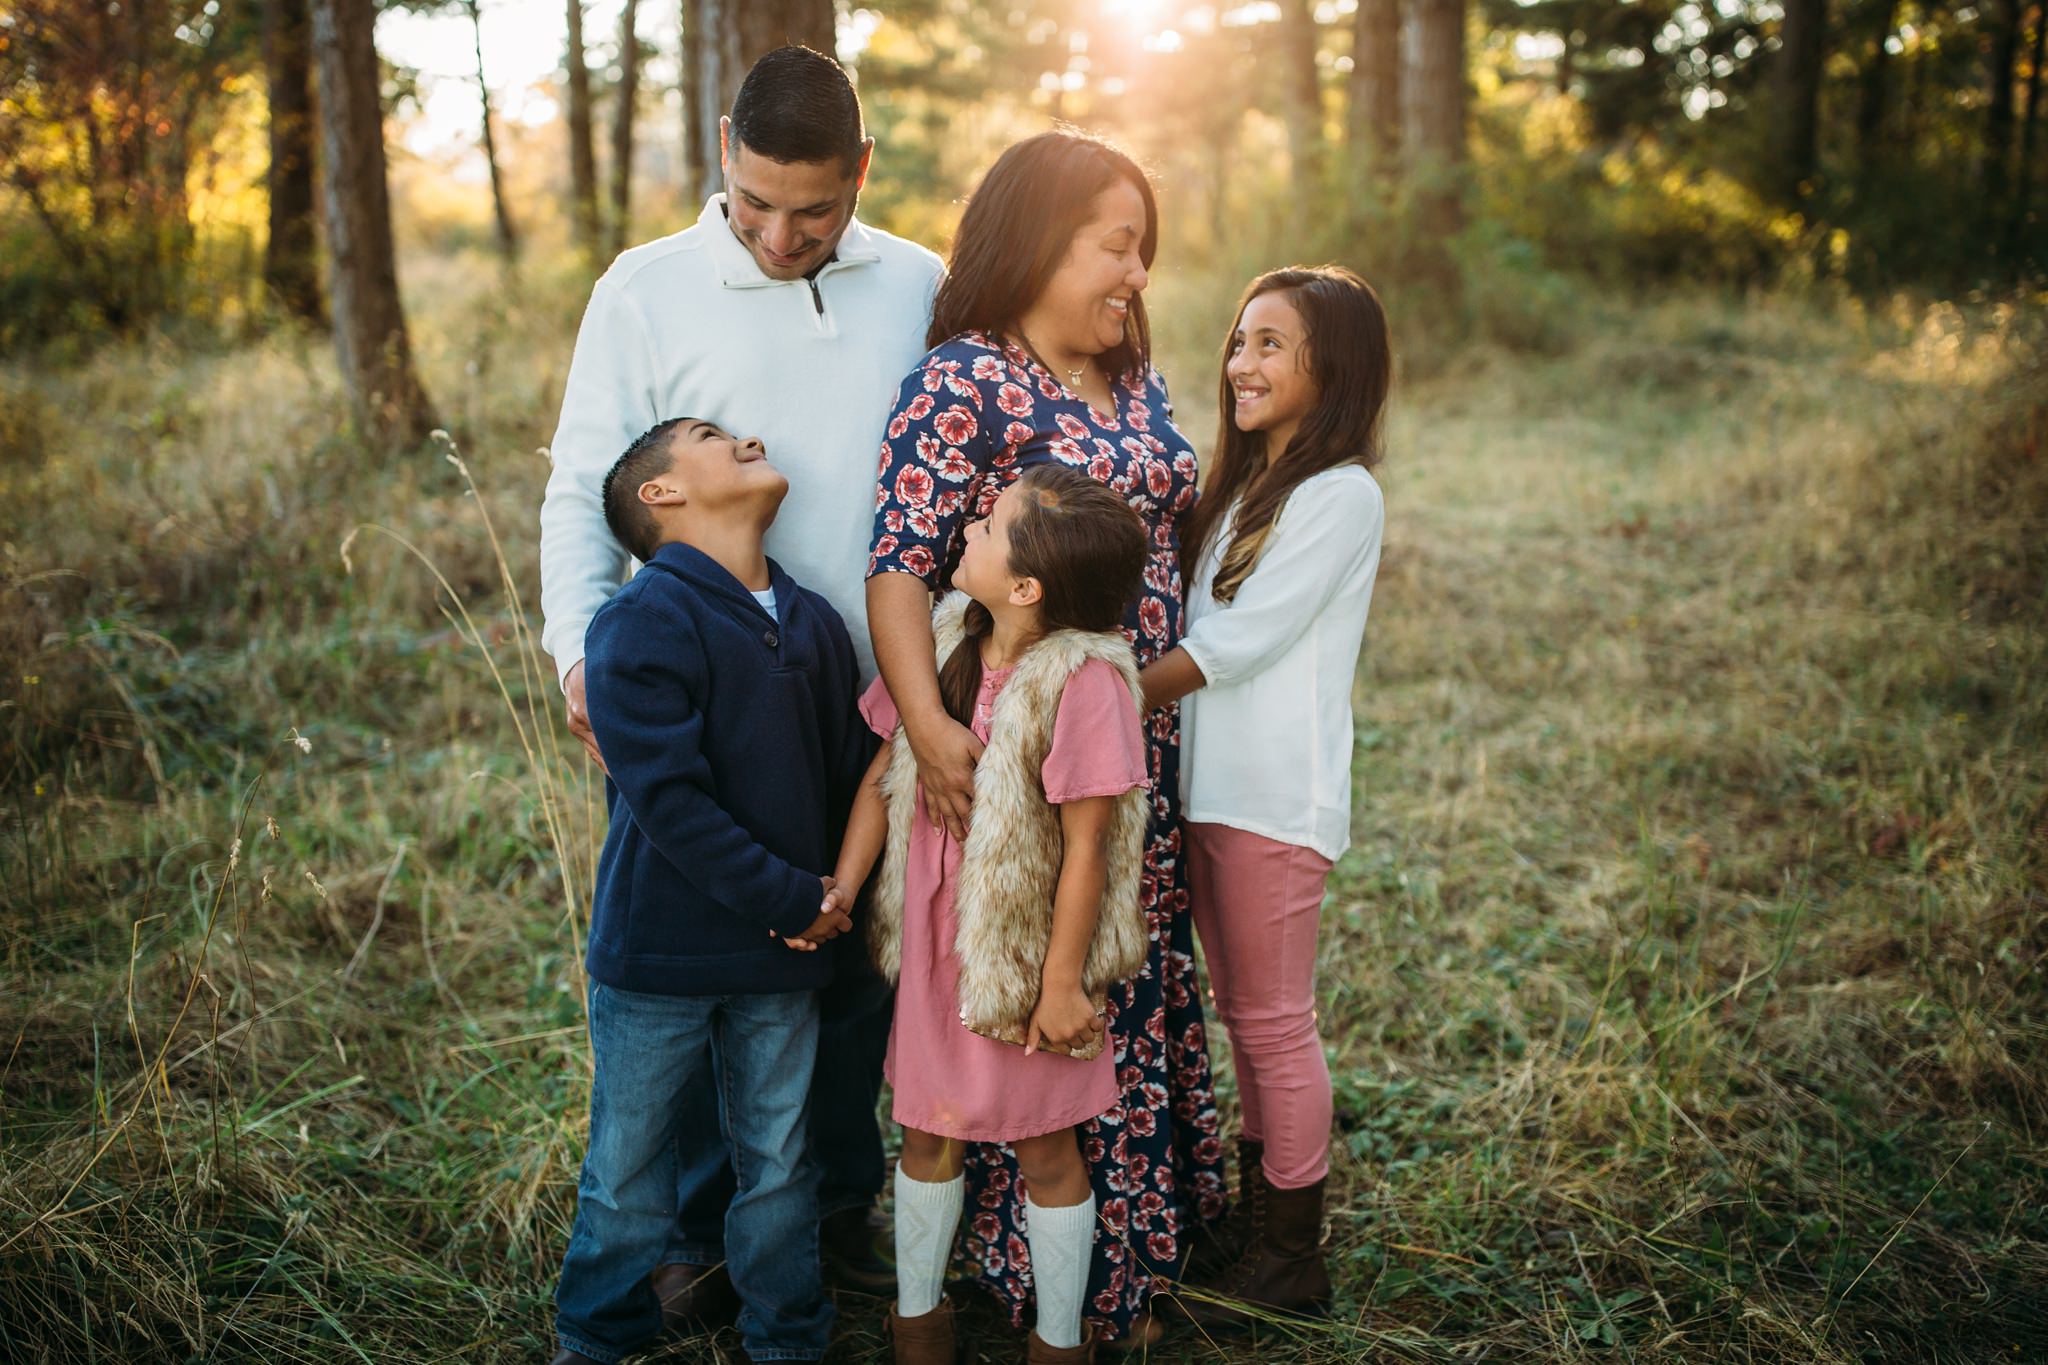 Fall Family Pictures in Beautiful Field | Whidbey Island Family Photographer